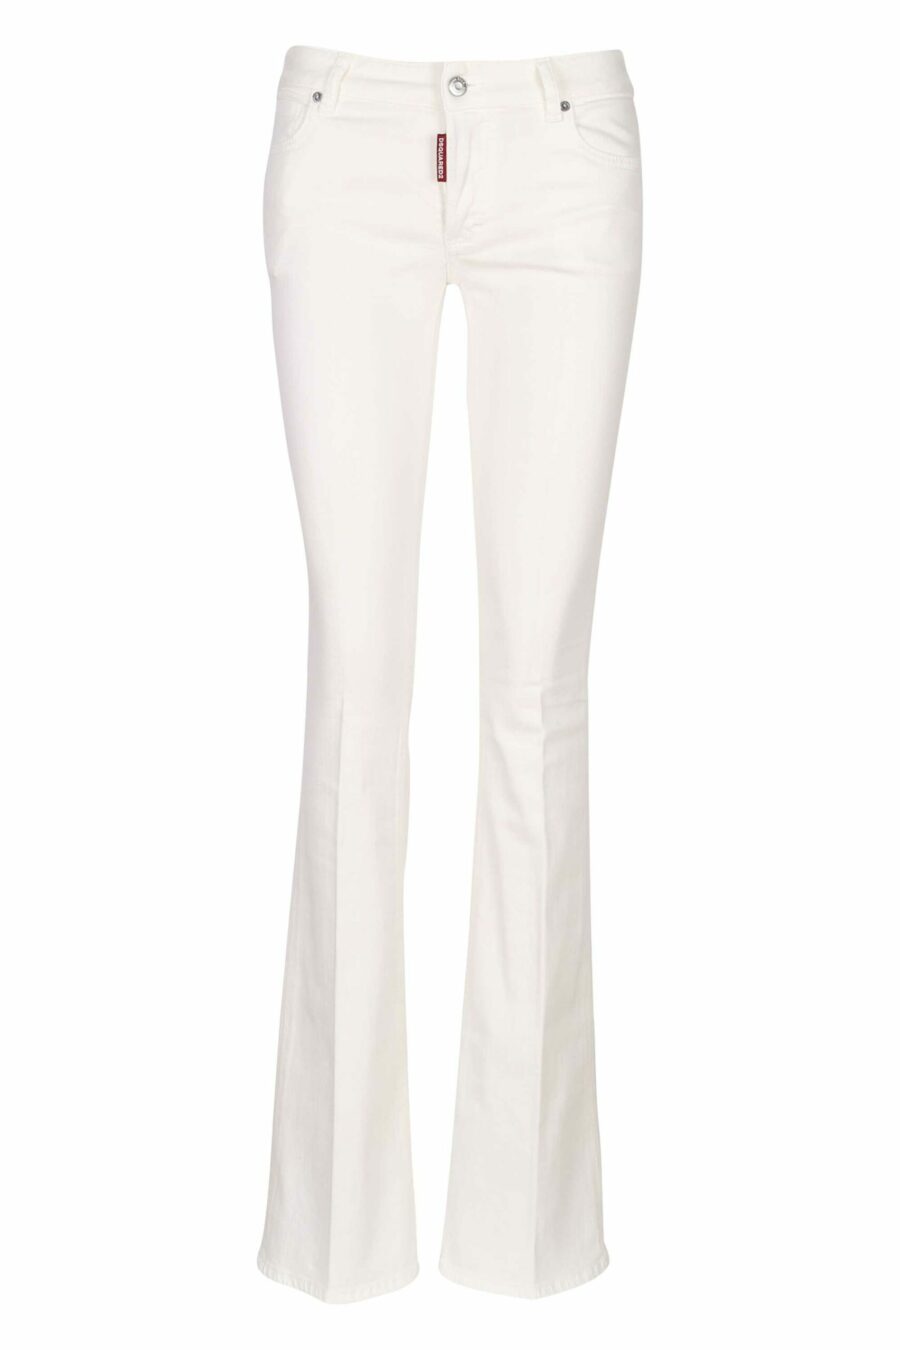 White "twiggy jean" jeans with wide boot - 8054148307912 scaled